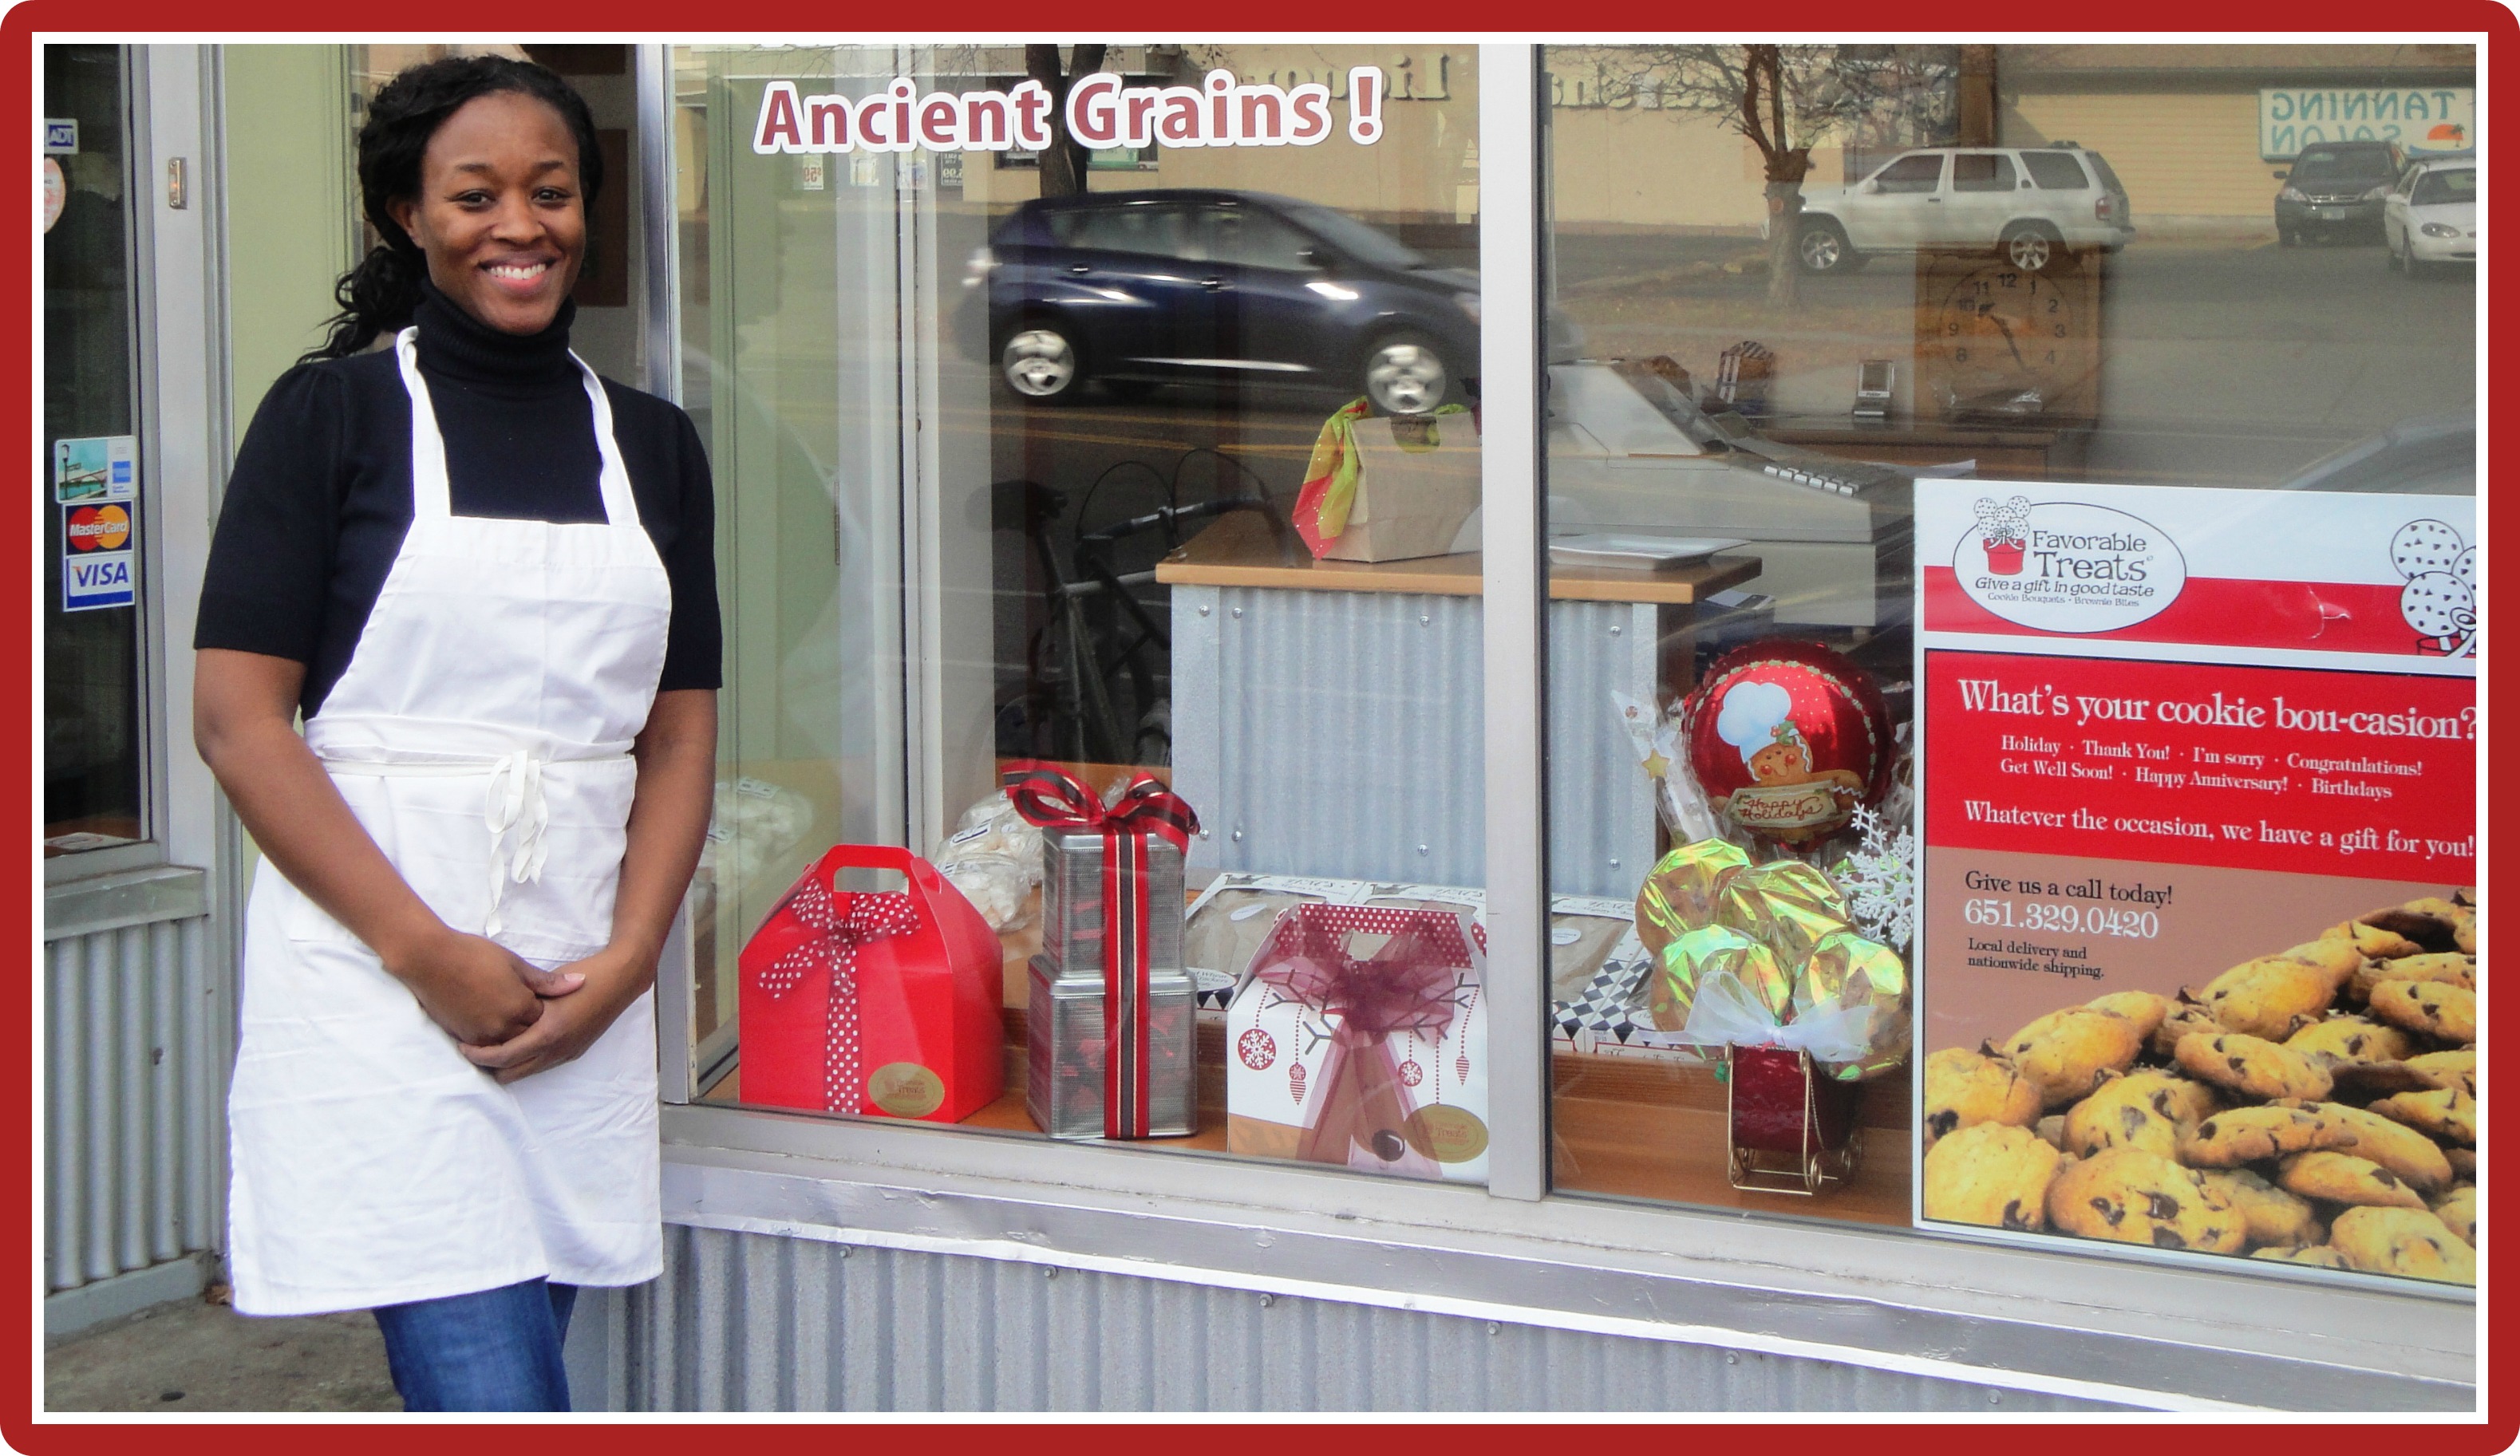 A woman in an apron smiles outside a bakery with a display window. signs and baked goods are visible, along with the text "ancient grains!" above her.